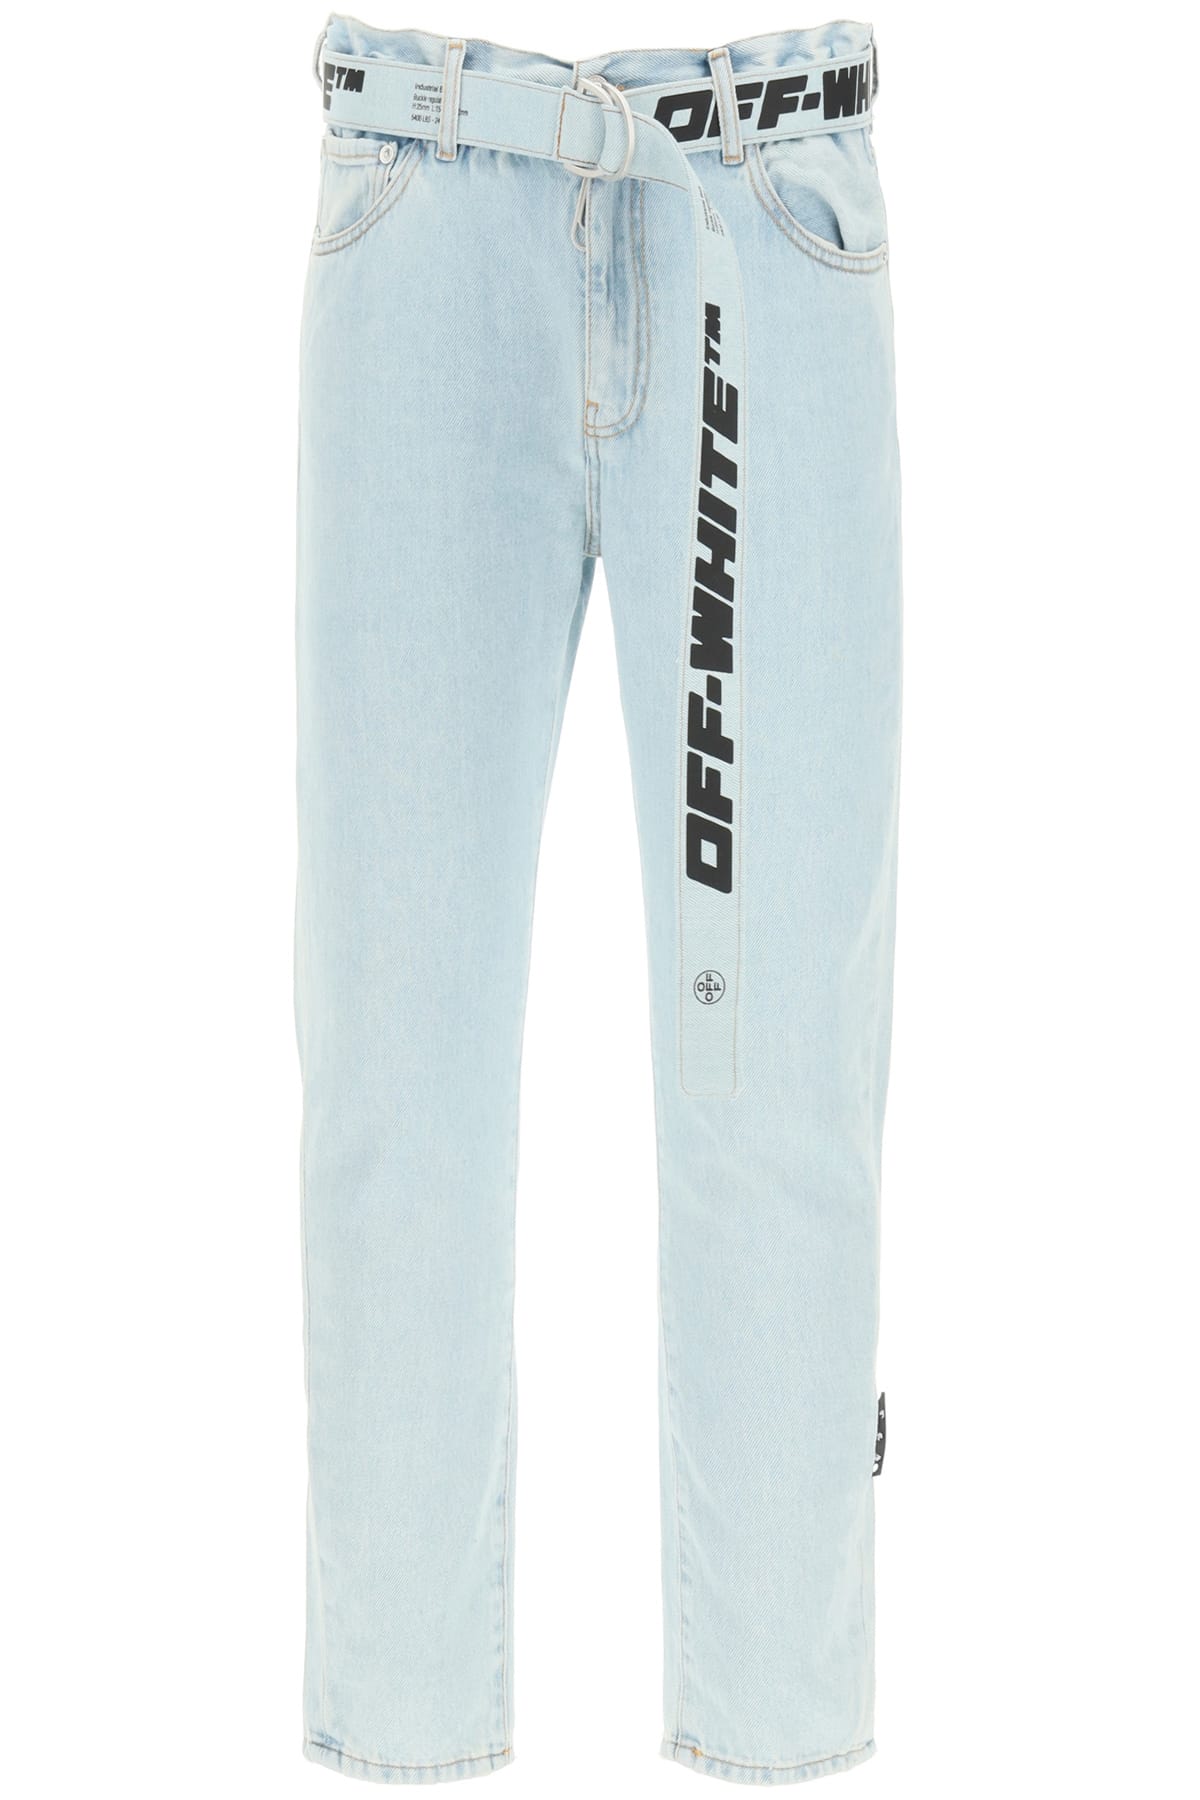 Off-White Belted Jeans